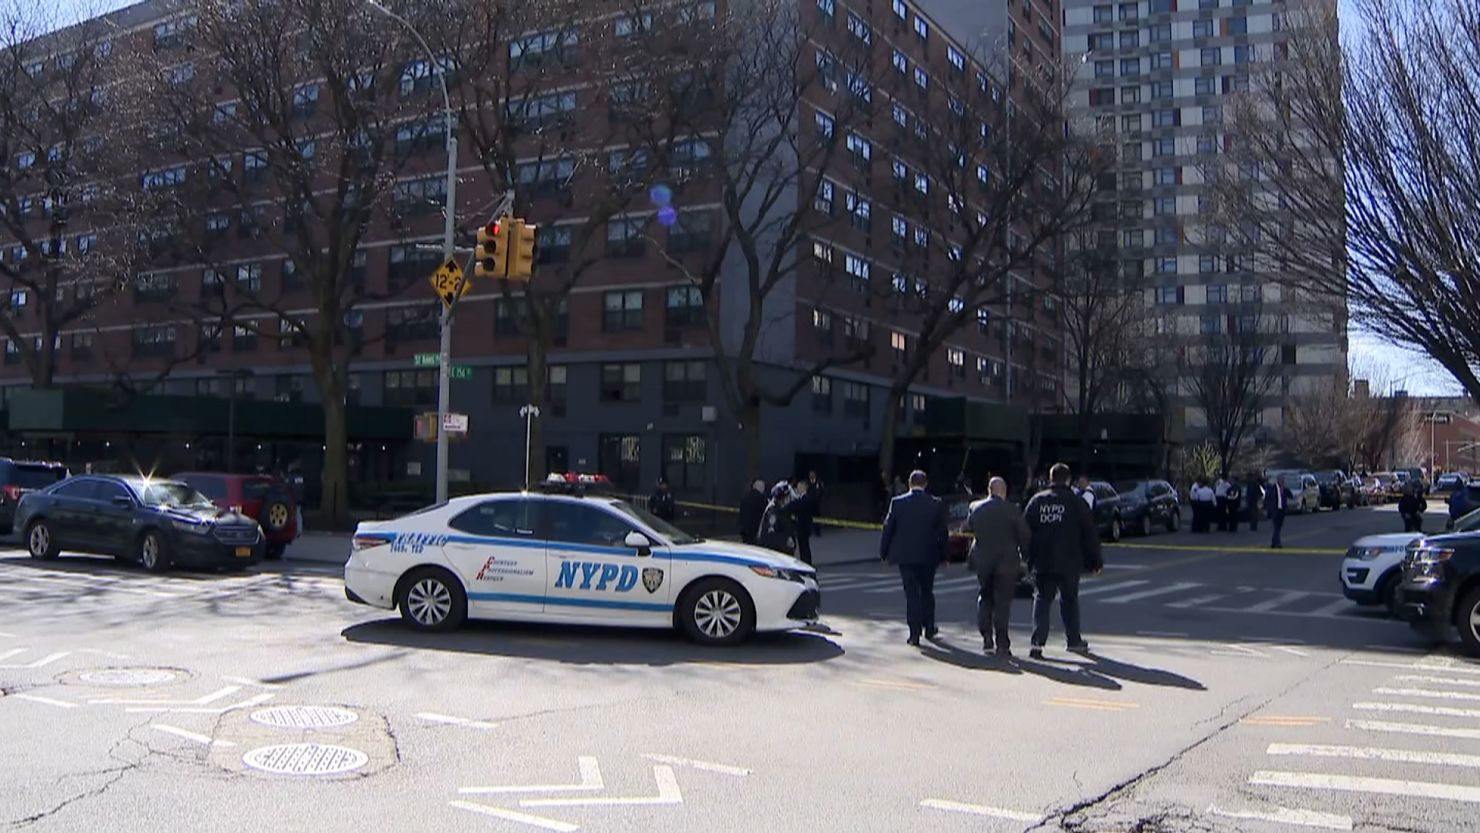 Police respond to the scene of a shooting in the Bronx borough of New York City on April 8, 2022.